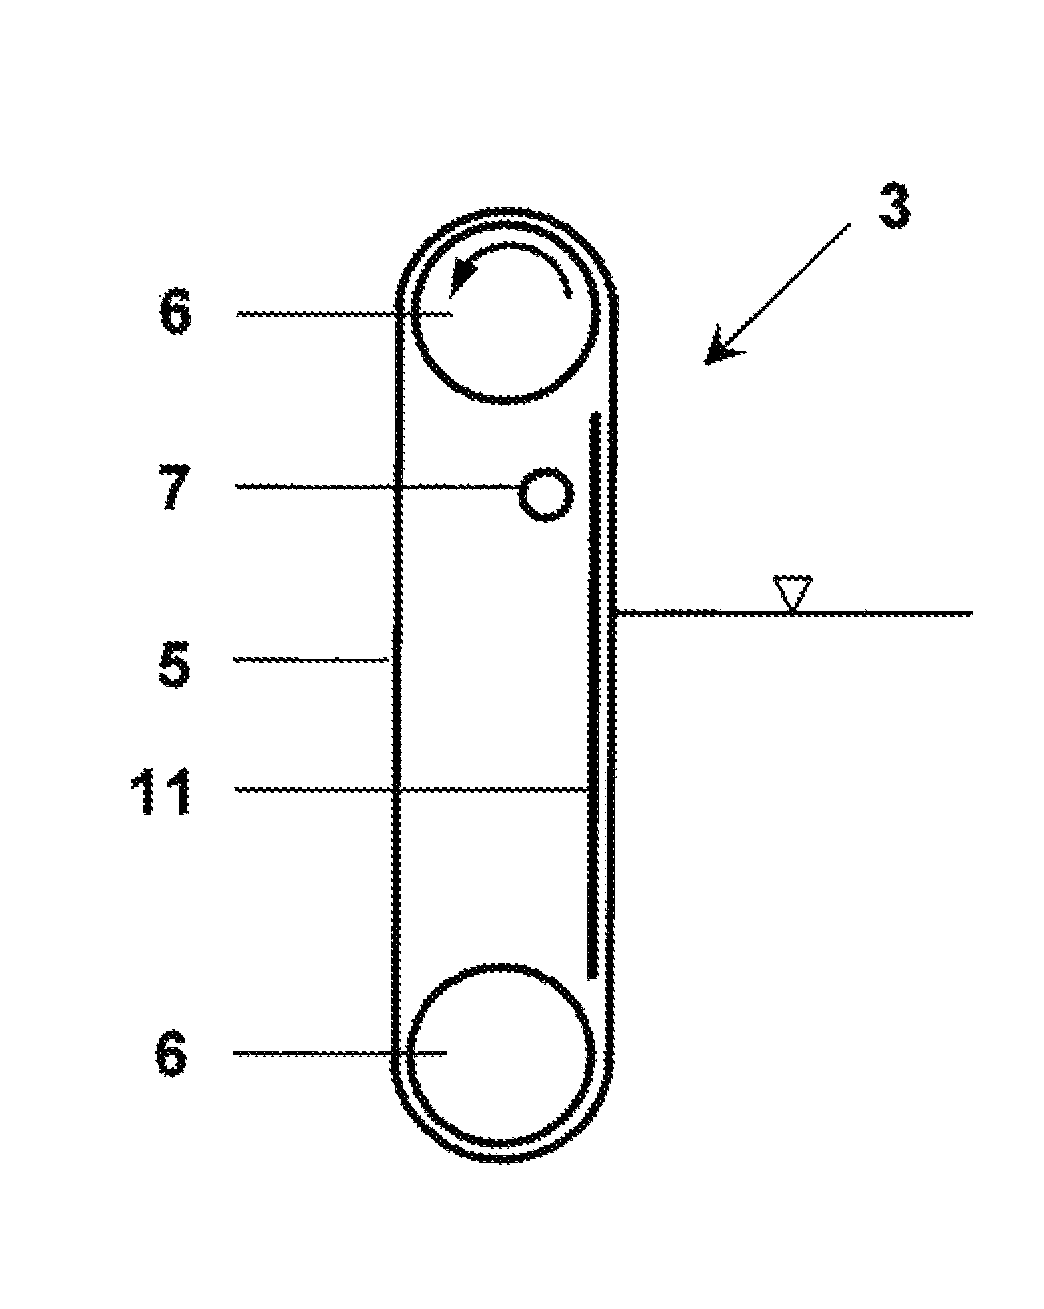 Method and apparatus for biological wastewater purification